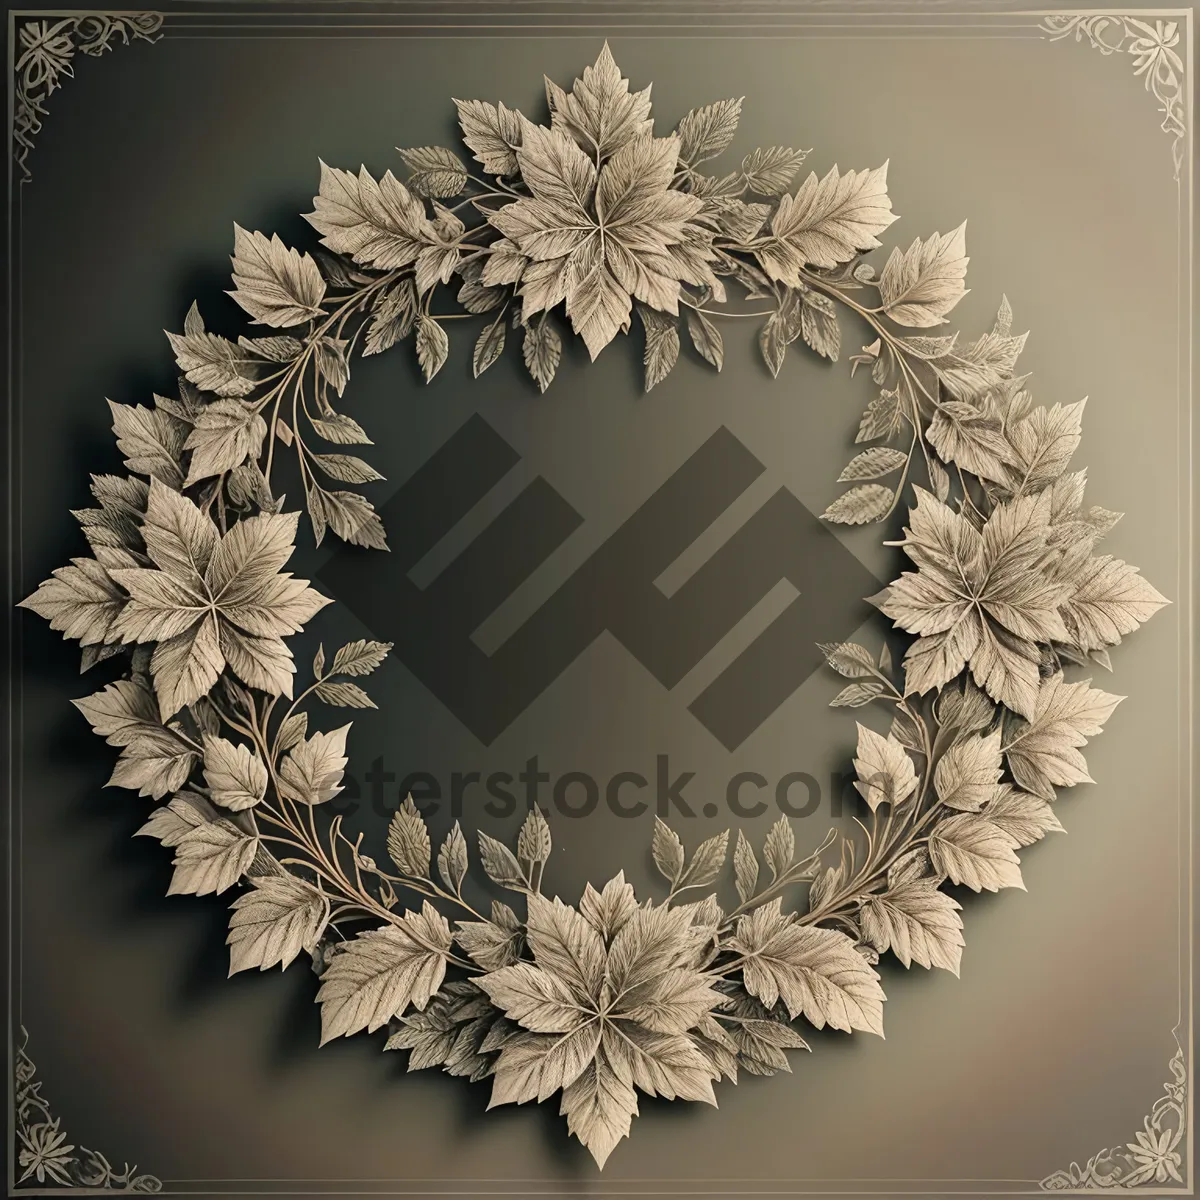 Picture of Vintage Floral Snowflake Ornament Border